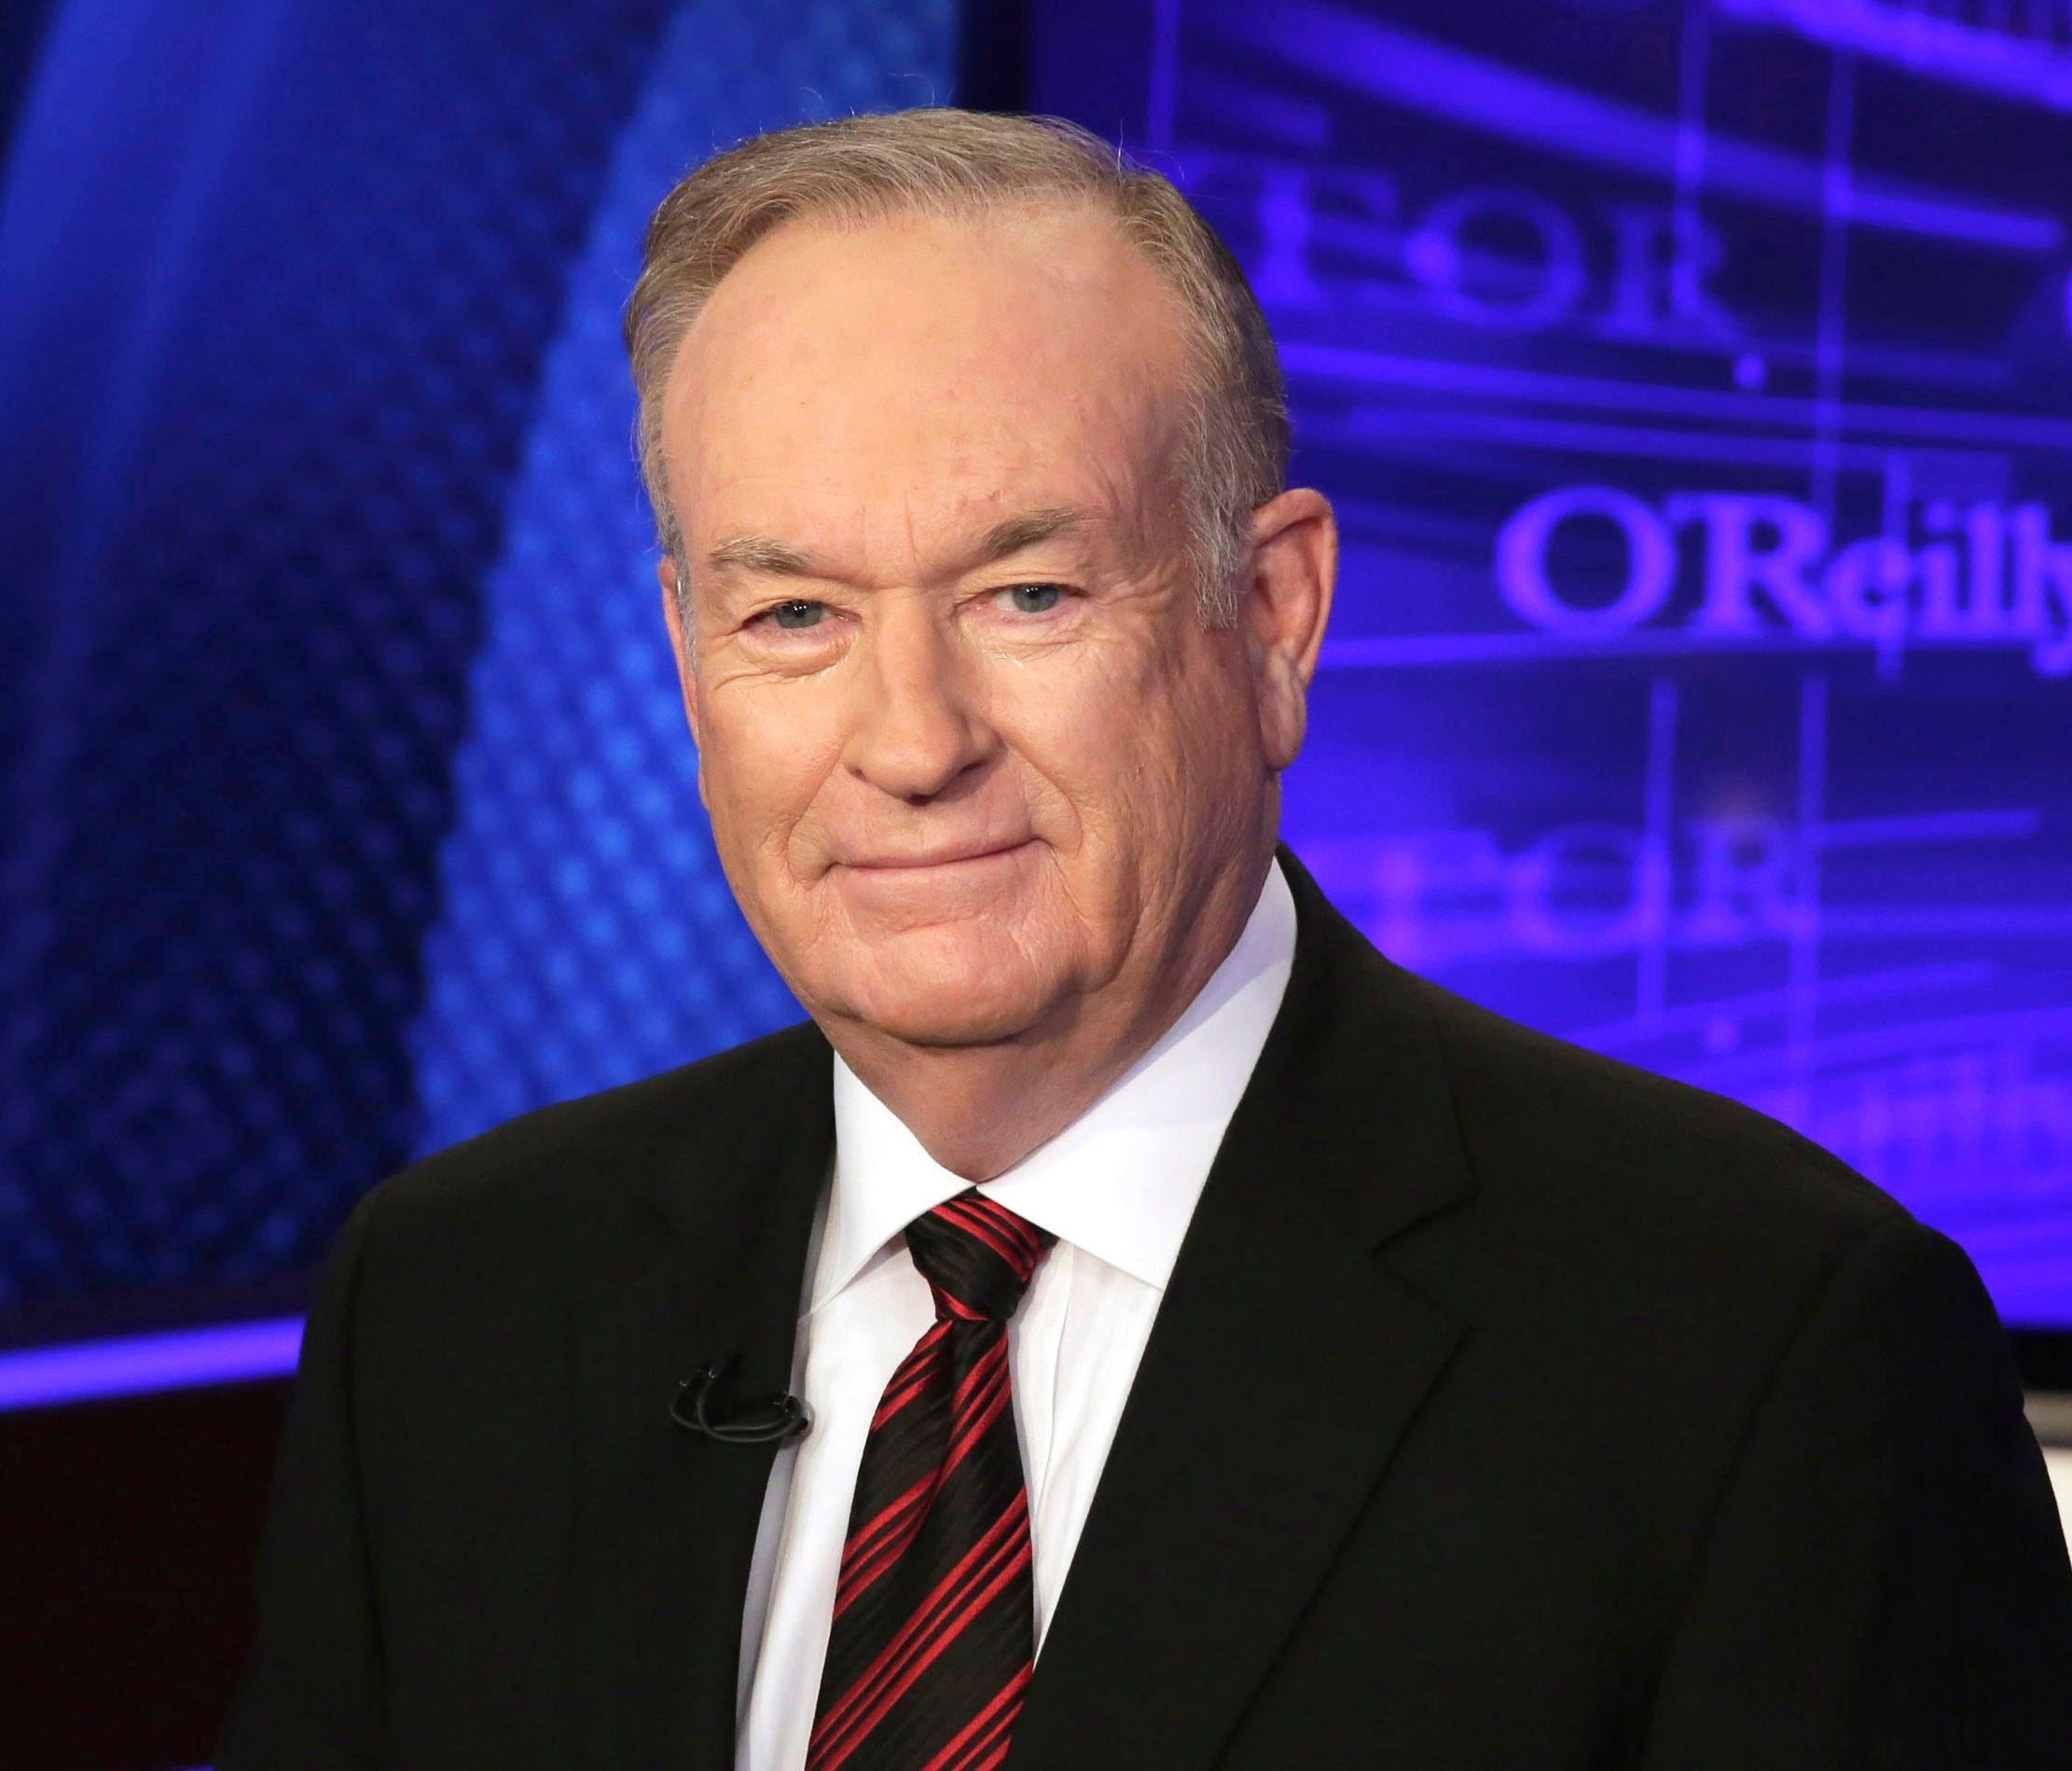 Bill O'Reilly Oct. 1, 2015. Six women have reached settlements with Fox News or O'Reilly after having made allegations against the host, whom the network fired in April, according to the New York Times. O'Reilly has repeatedly denied charges of wrong